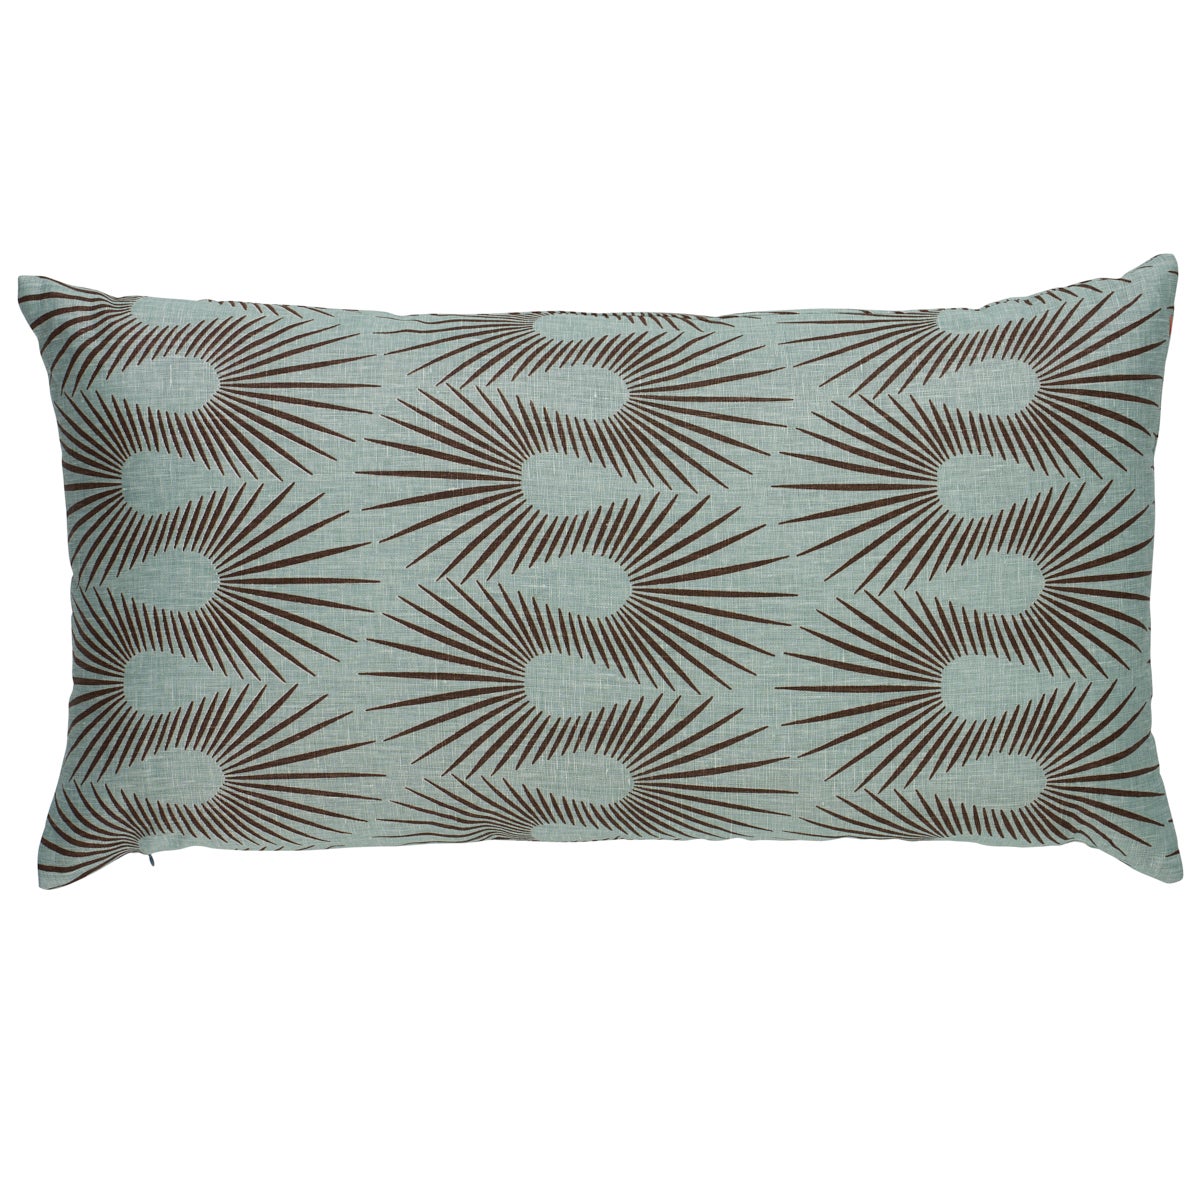 Hedgehog Pillow in Duck Egg Brown, 27x14" For Sale